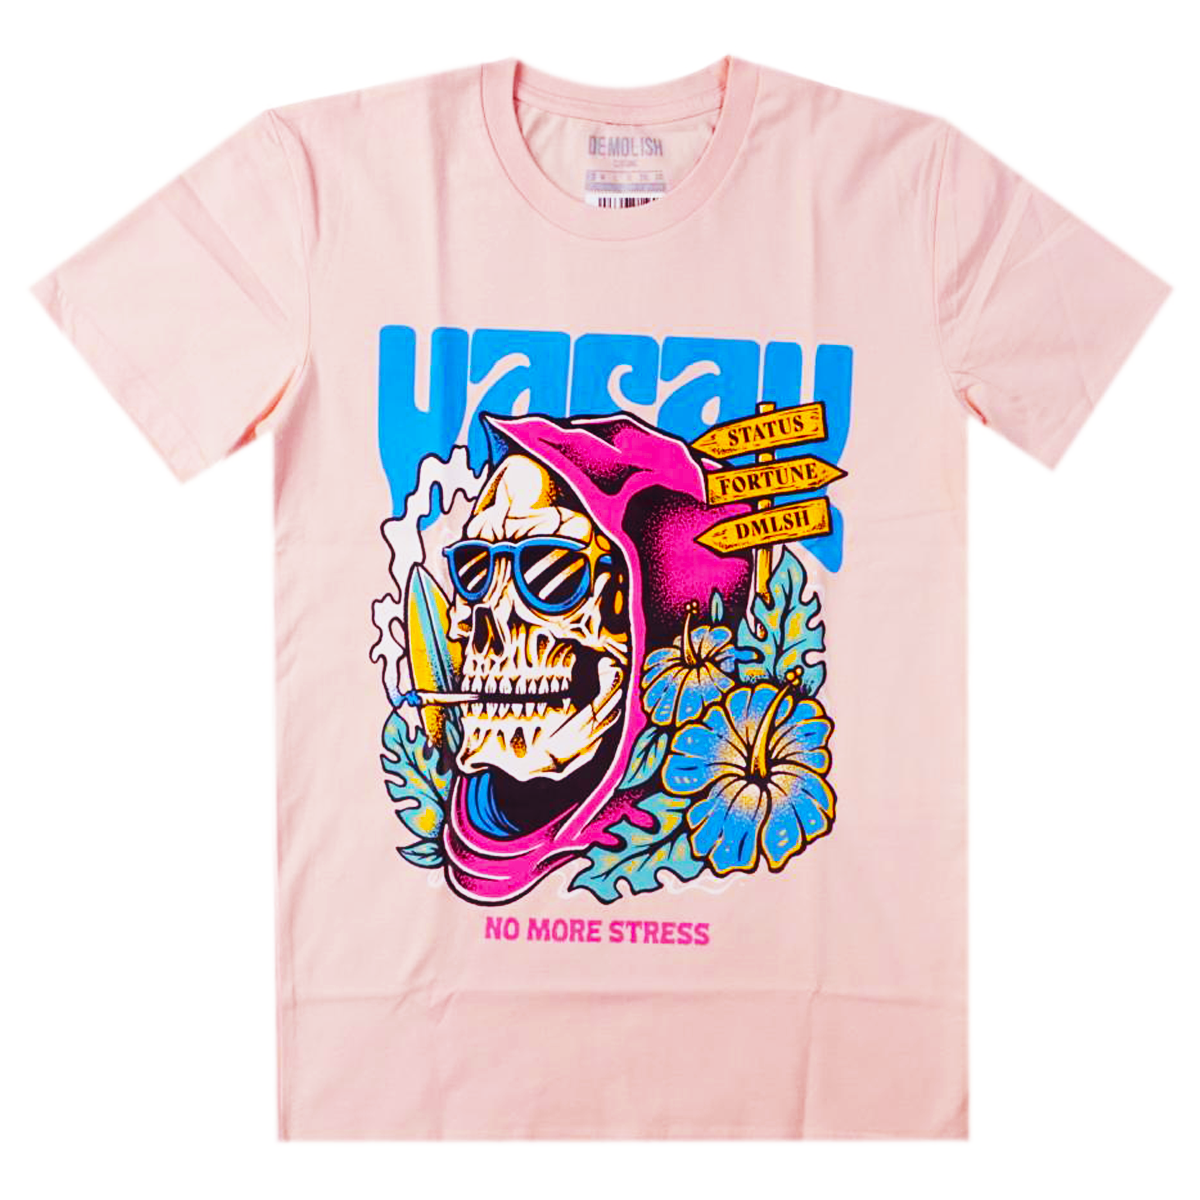 Vacay No Stress Tee (Pale Pink/Multi) /D18